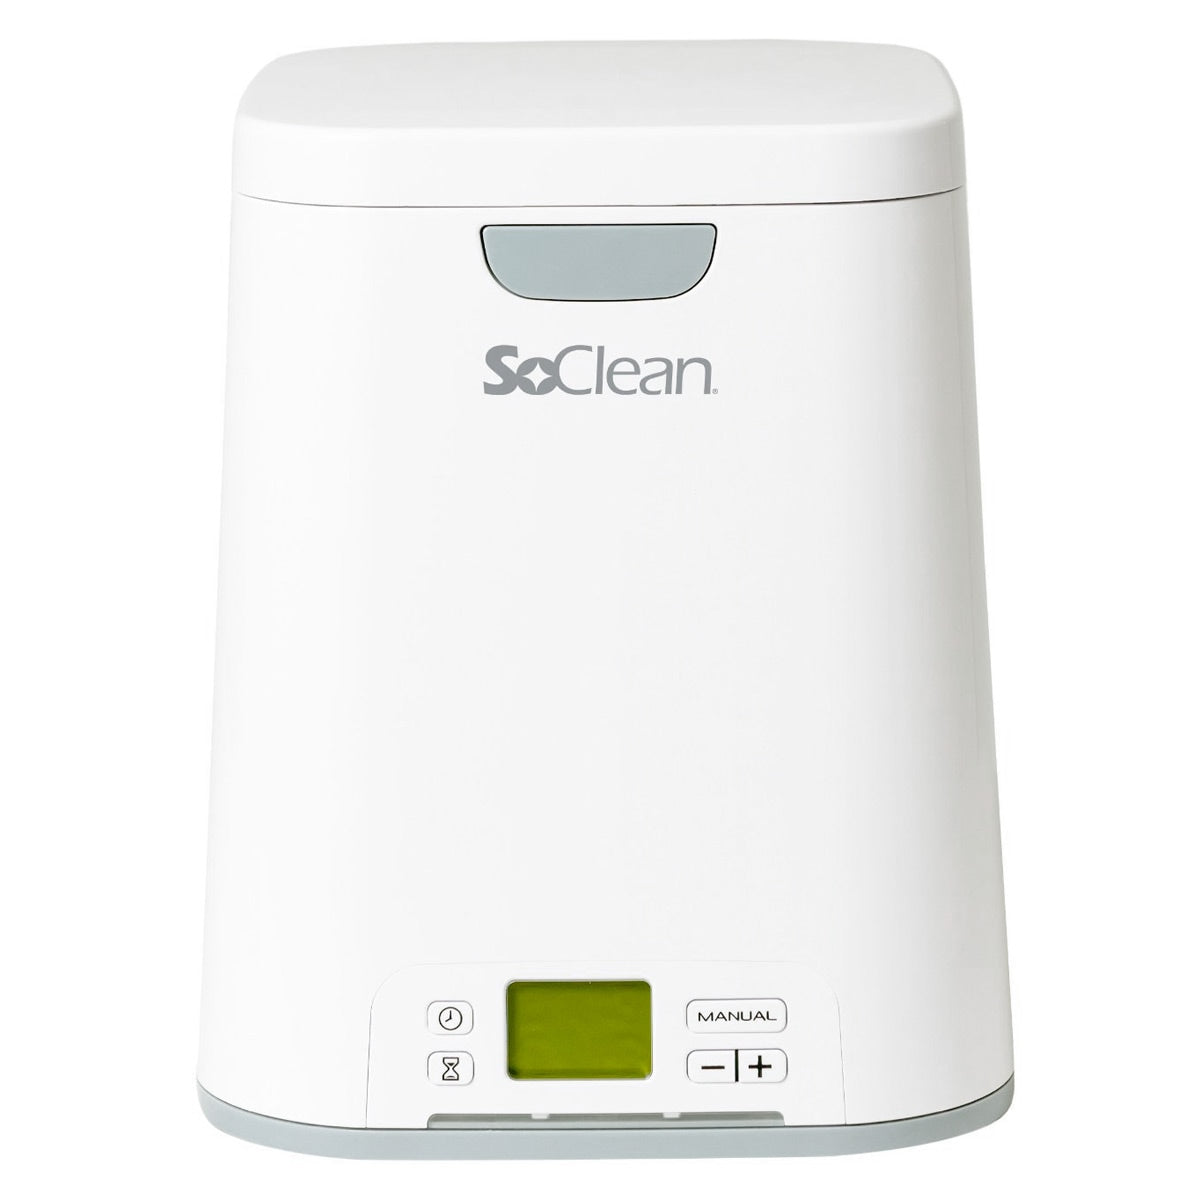 SoClean 2 CPAP/BiPAP Cleaner & Sanitizer - DISCONTINUED